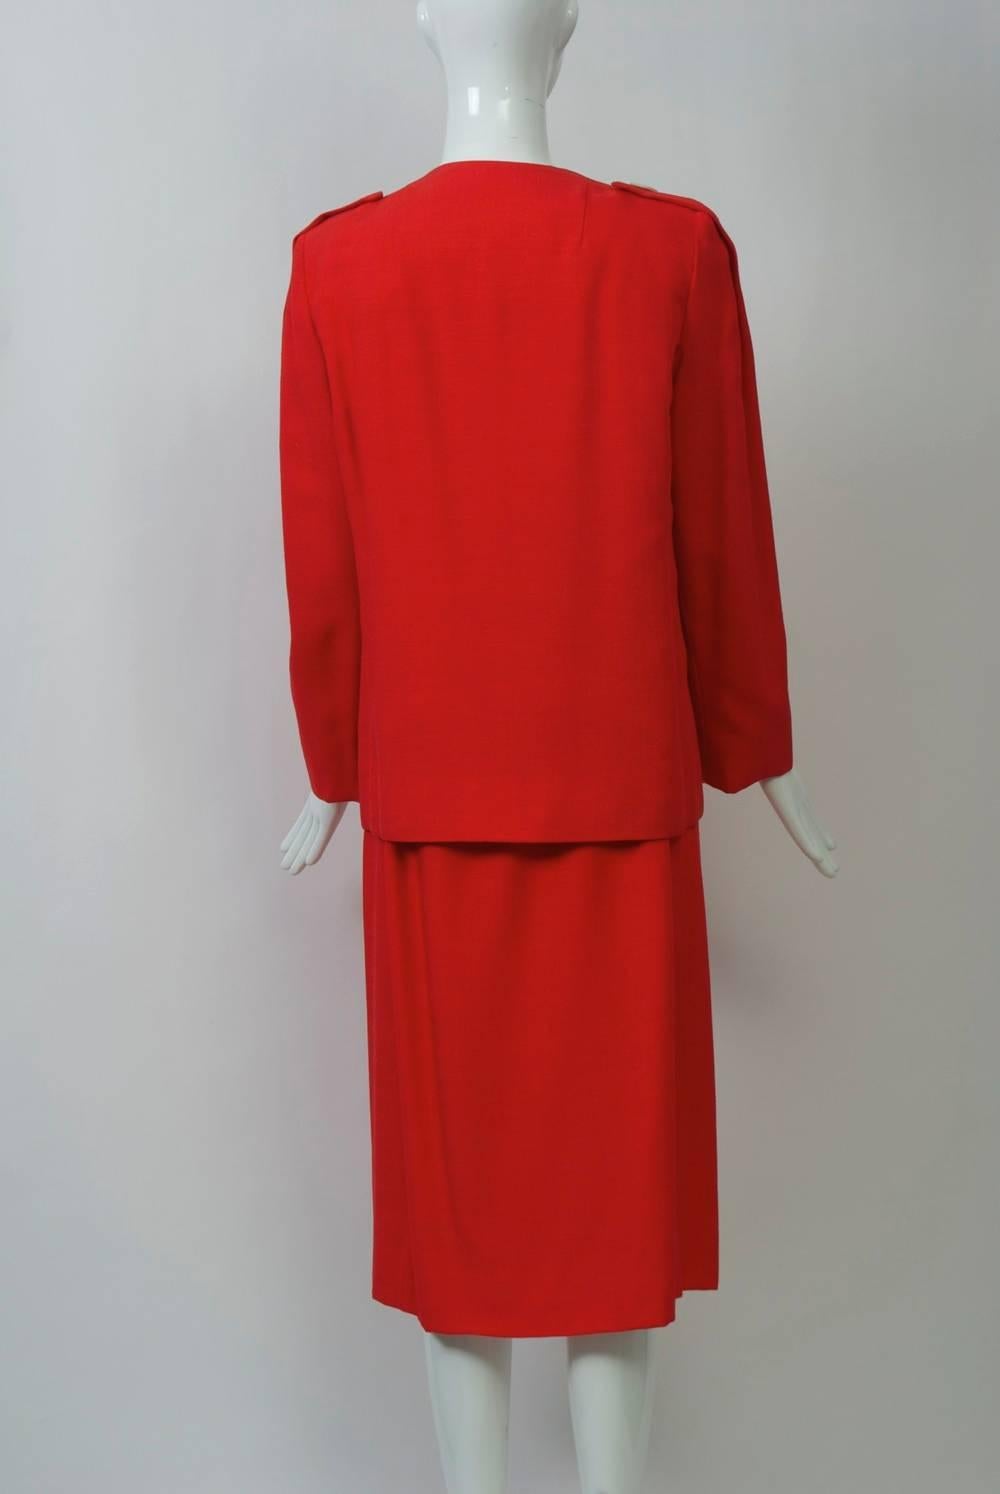 Pauline Trigére Red Ensemble In Excellent Condition For Sale In Alford, MA